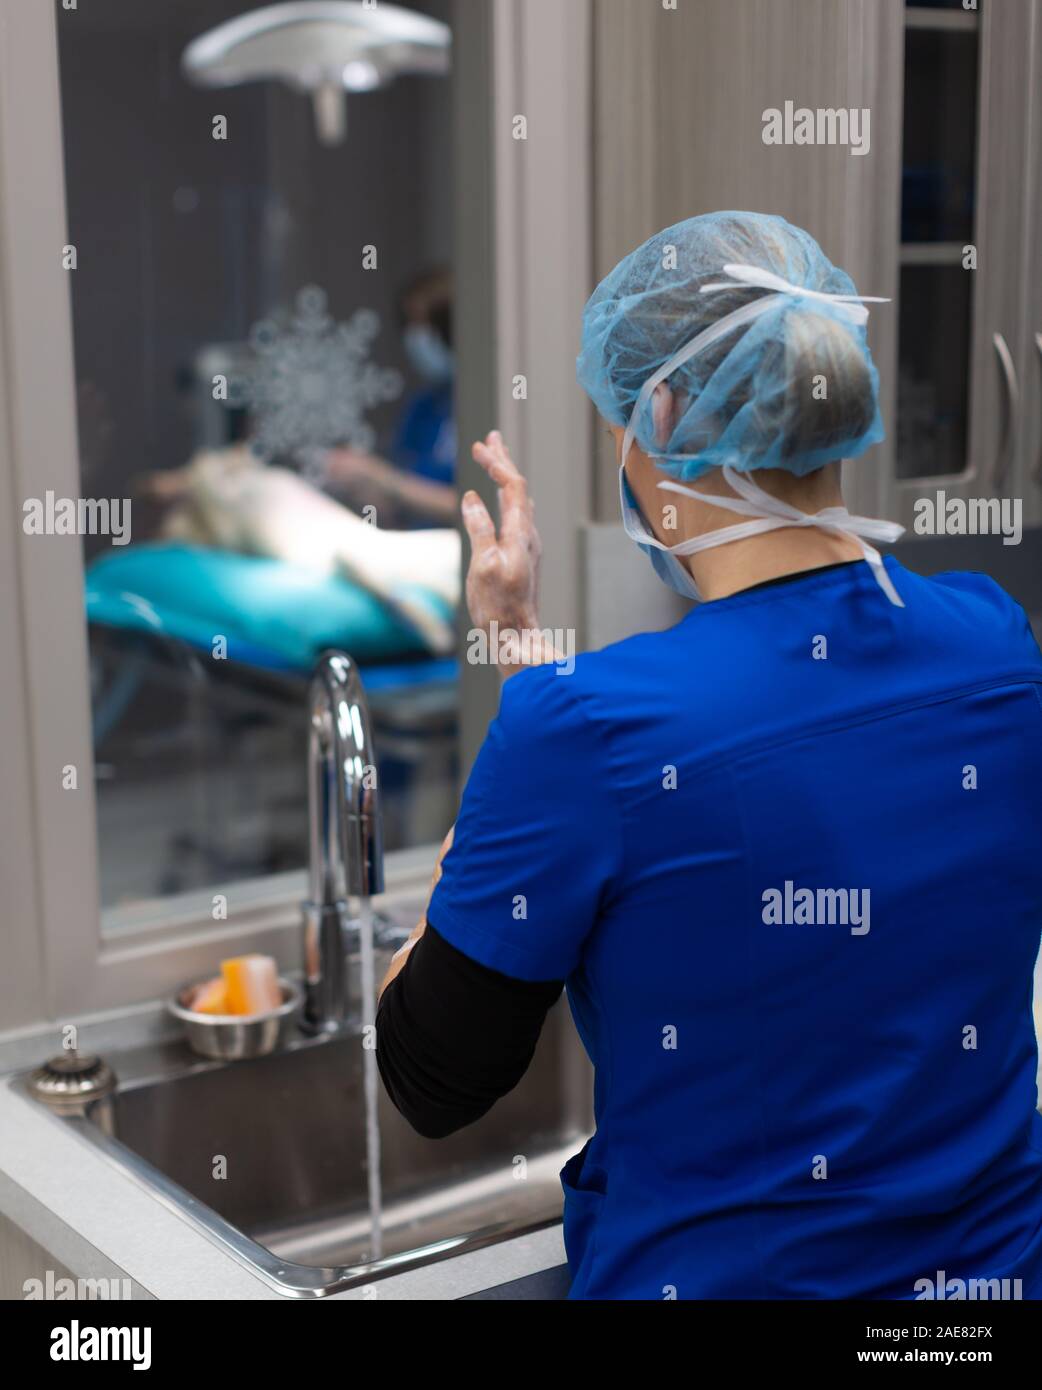 A veterinary surgeon goes through a thorough pre-surgery practice of scrubbing and then gowing up for surgery. Stock Photo